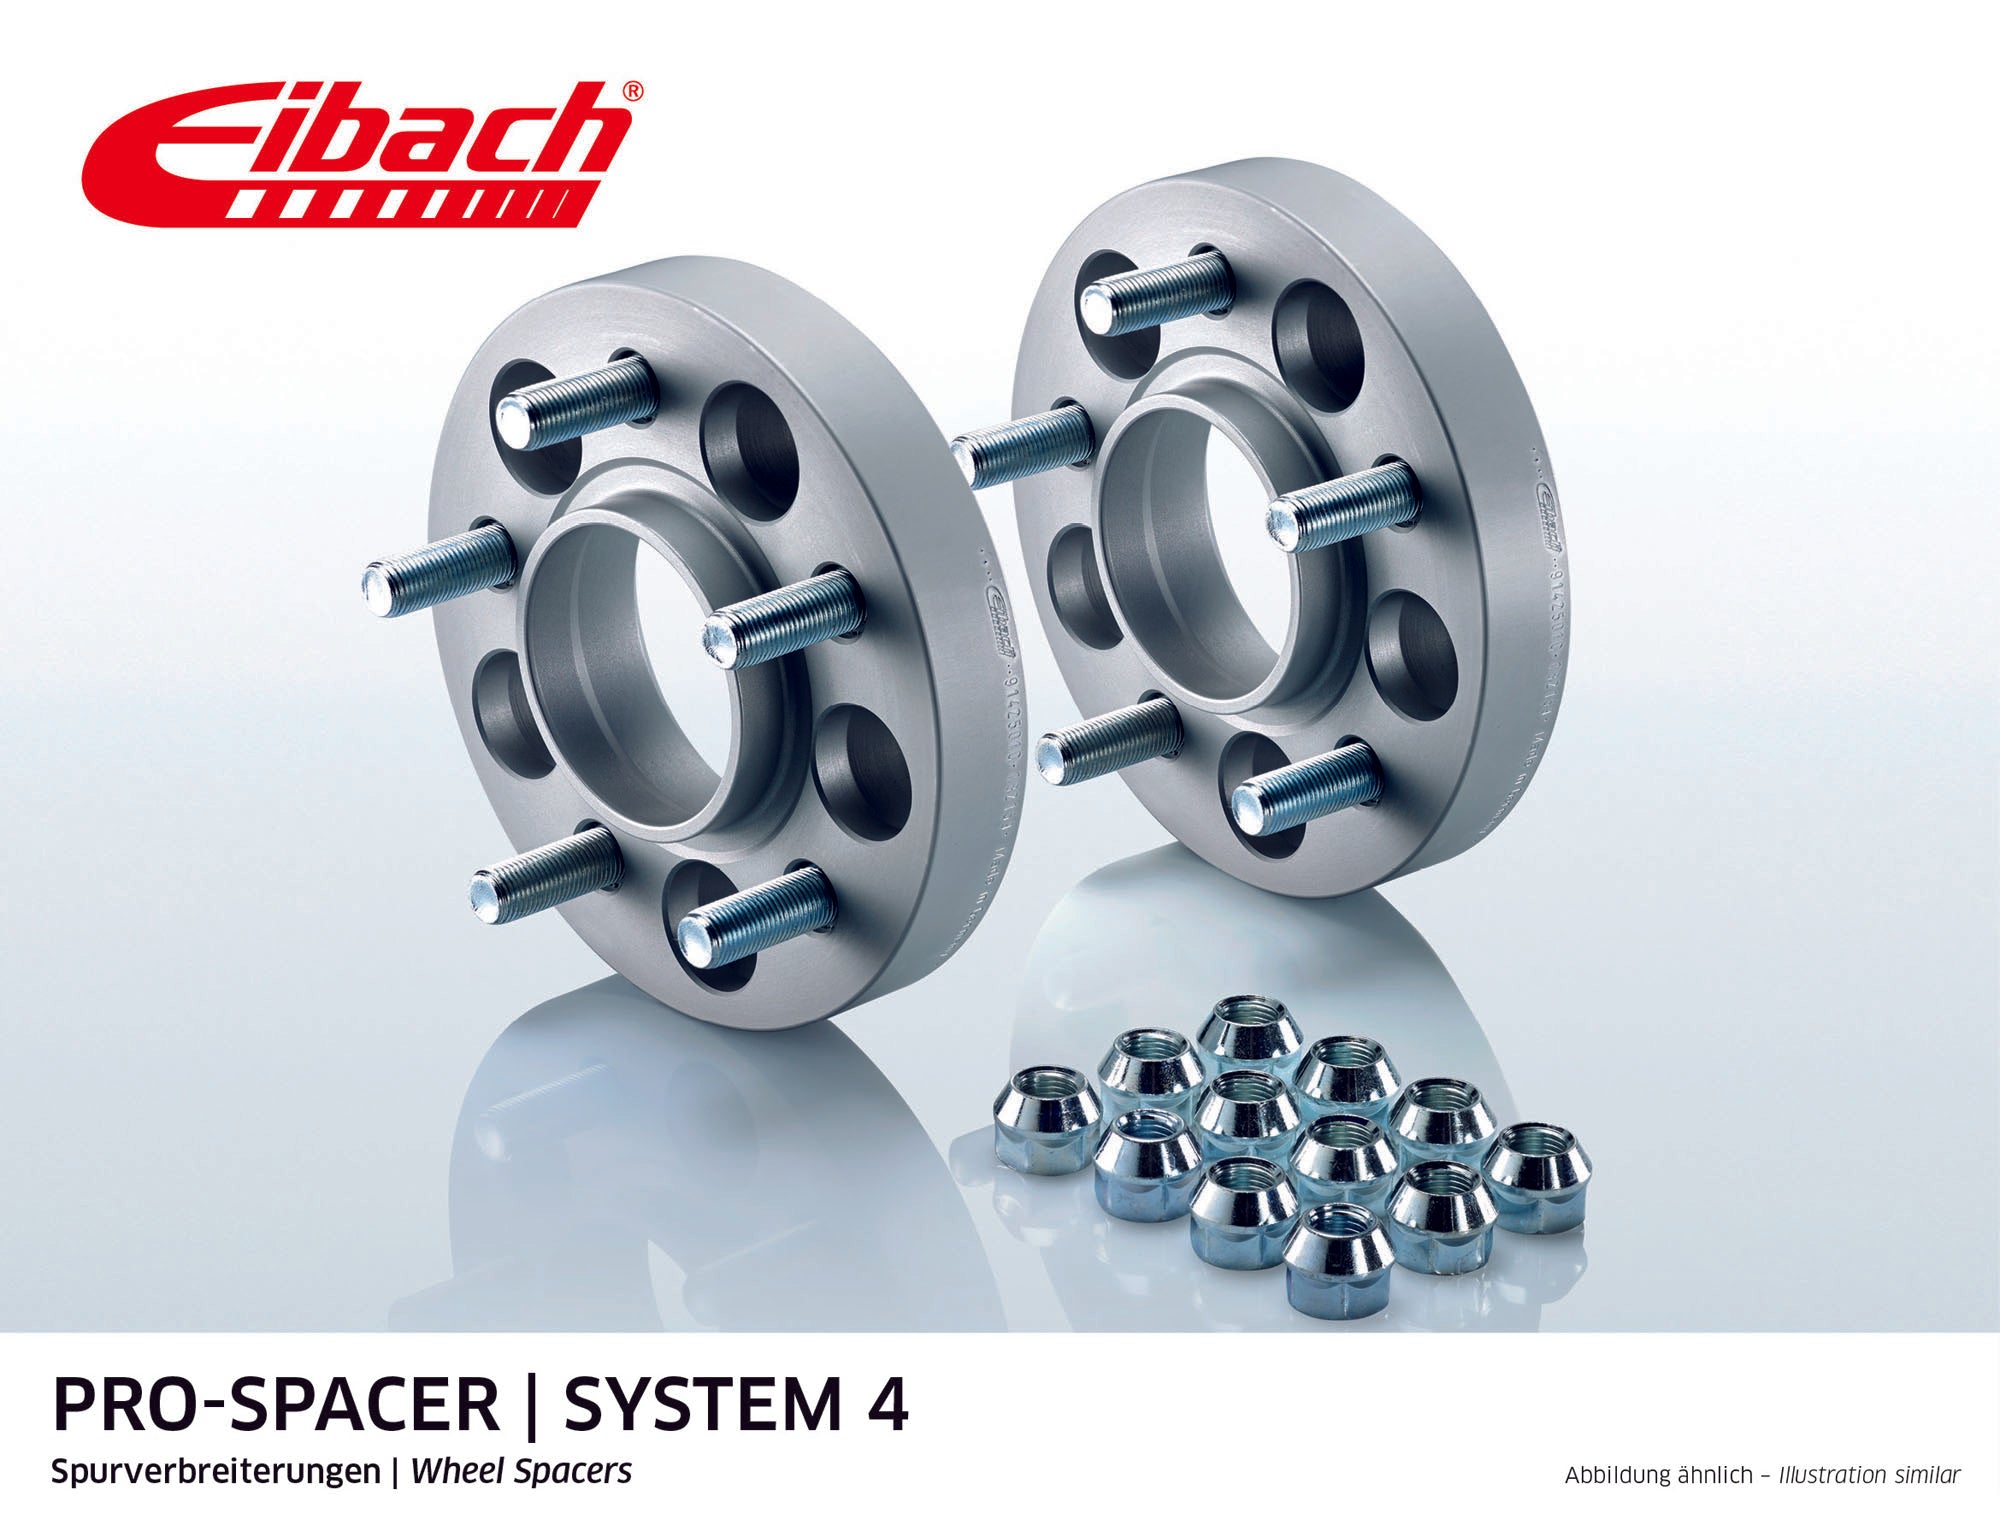 Eibach 15mm Pro-Spacer - Silver Anodized Wheel Spacer 911 1993-97 #S90-4-15-020